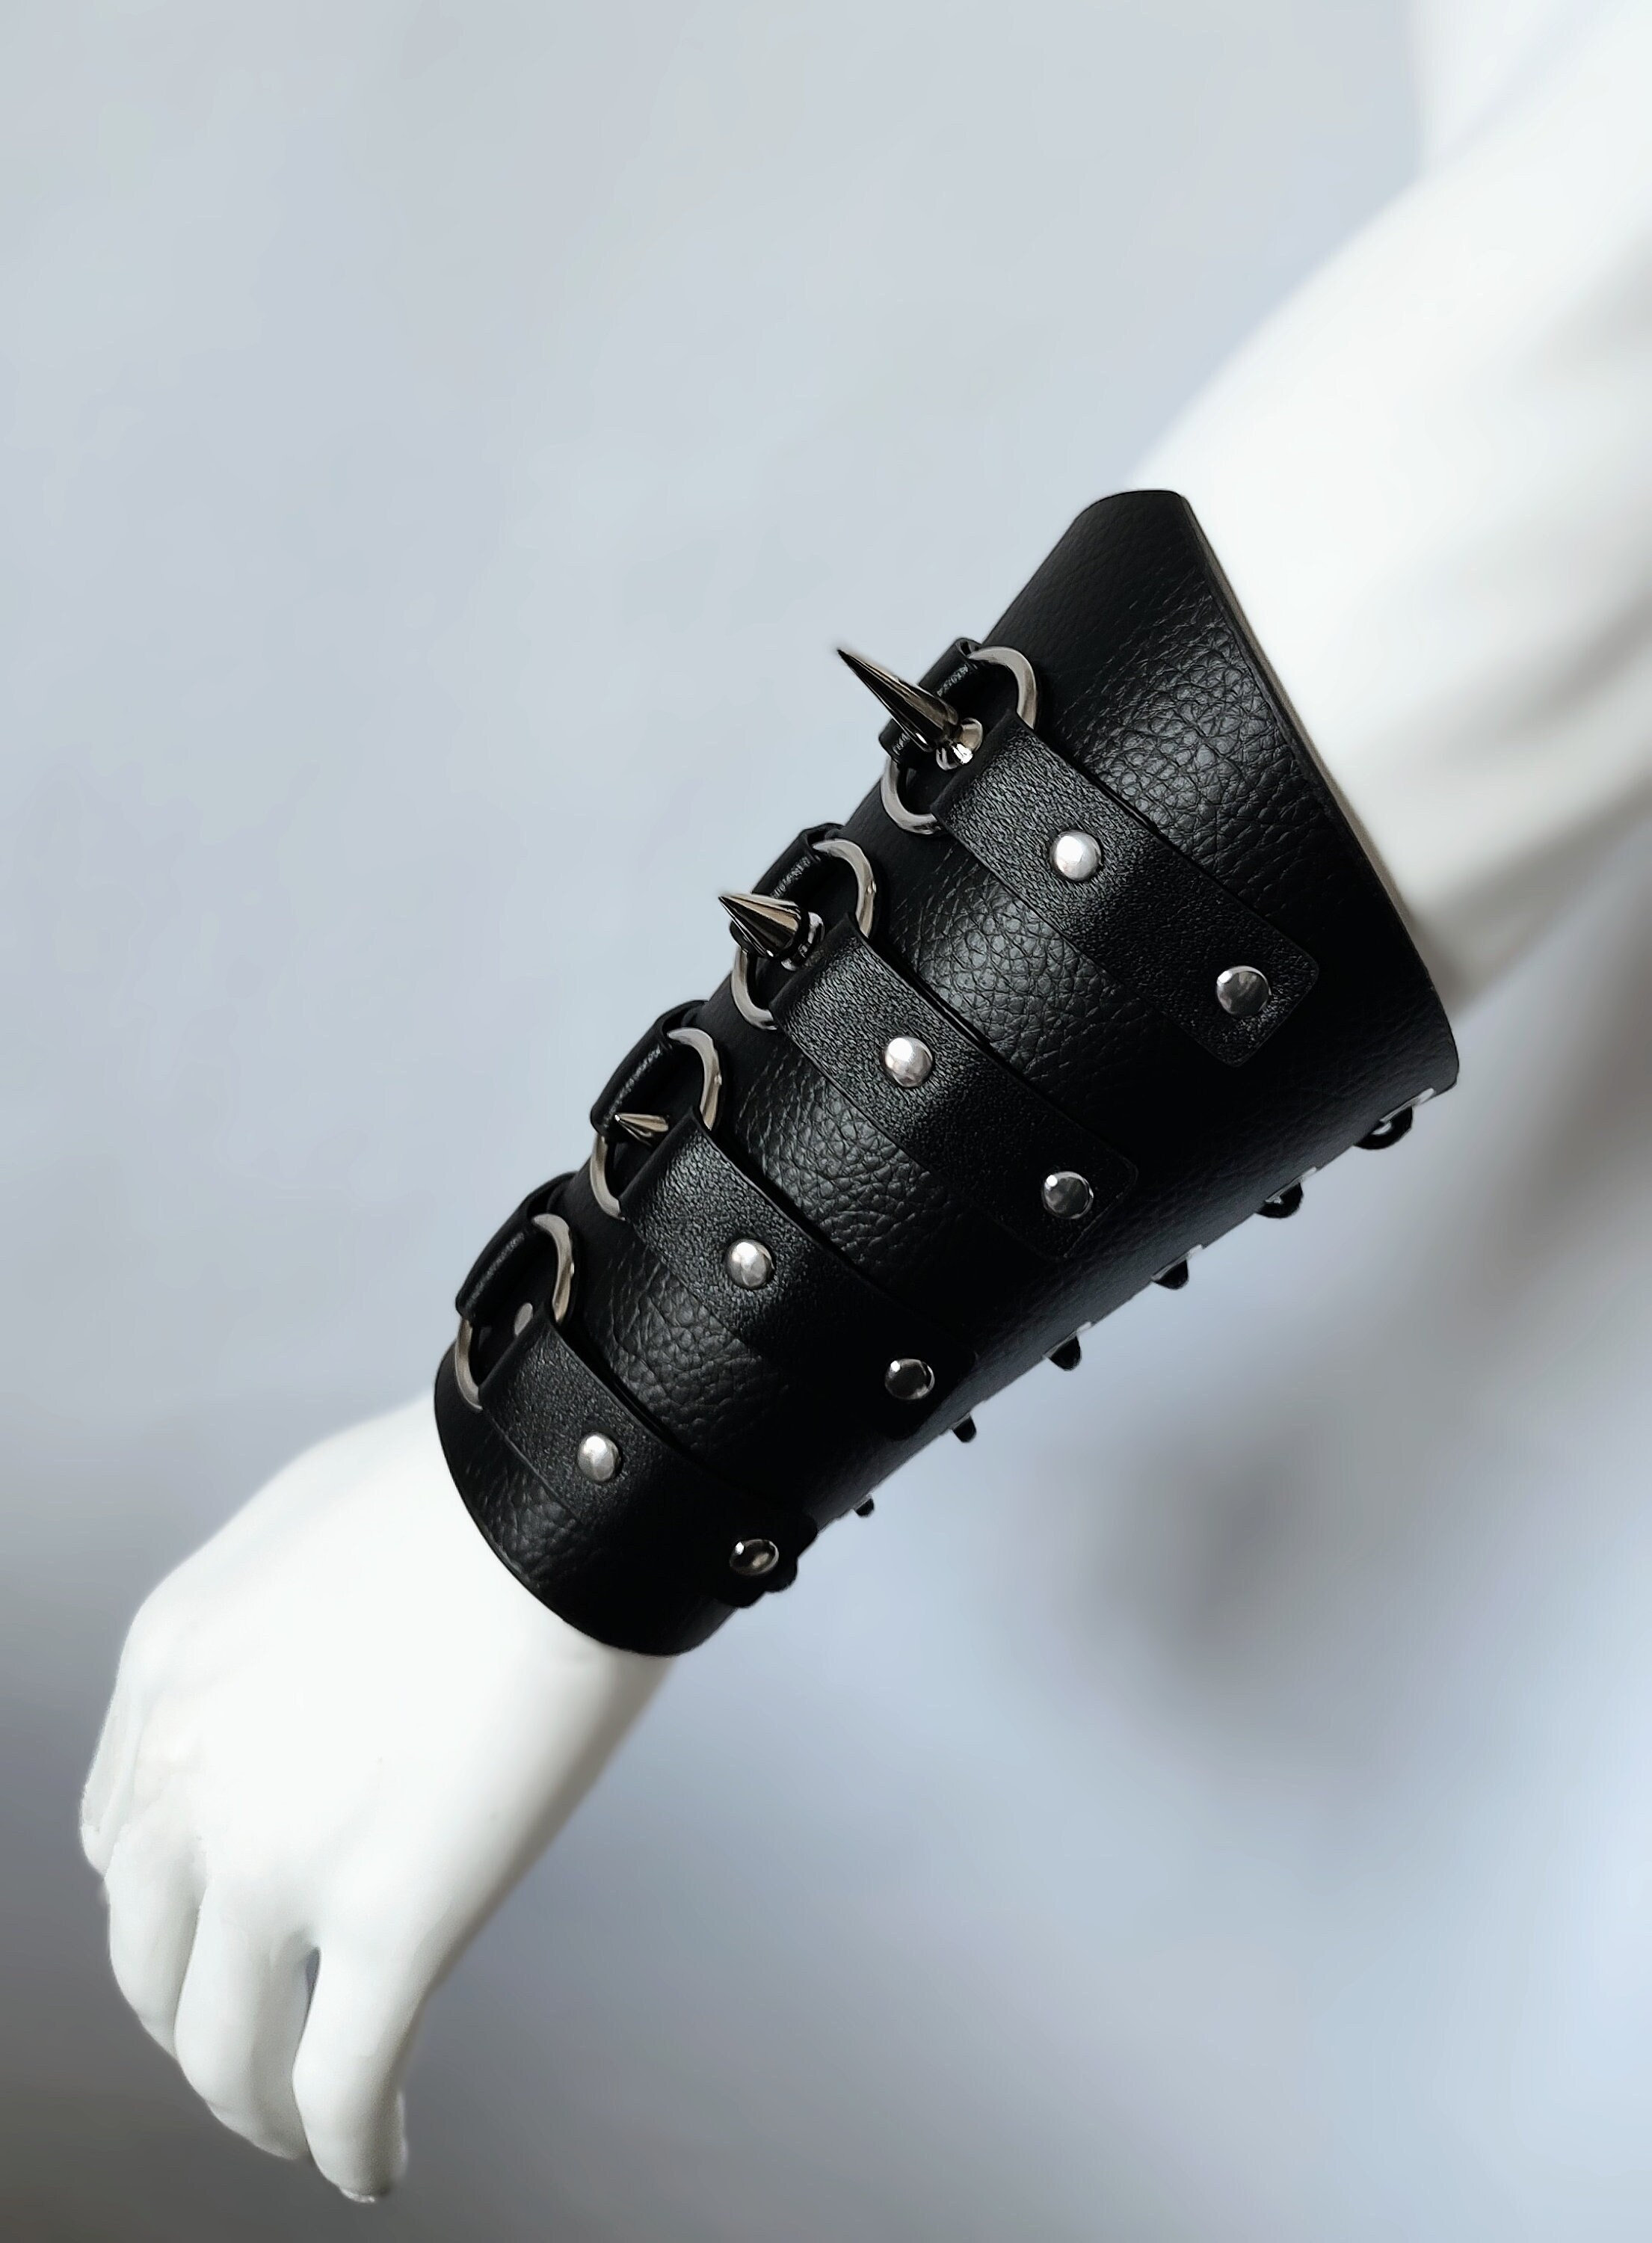 Studded Leather Arm Bracers Medieval Leather Bracers Leather Armour DK4109  -  Sweden